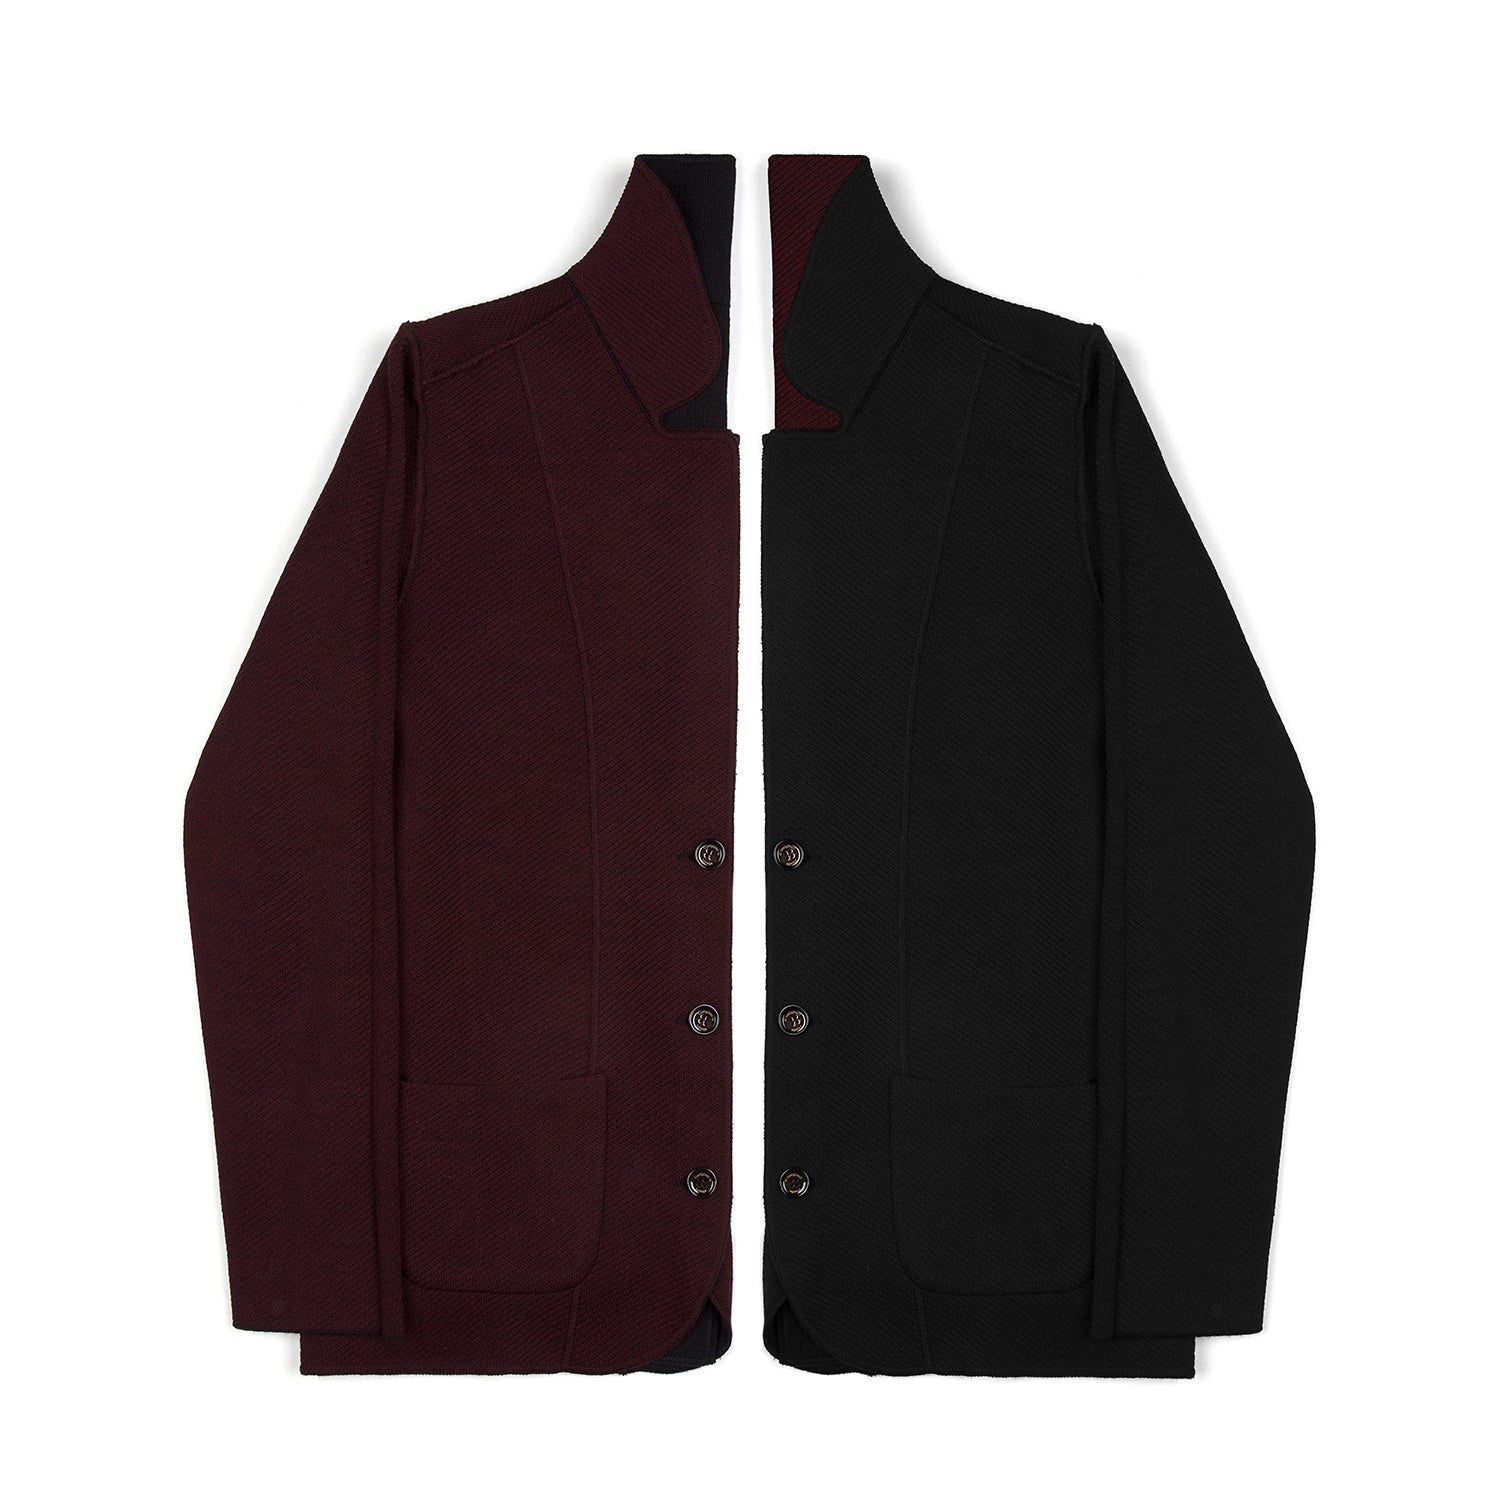 Double Face Blazer in Burgundy and Back